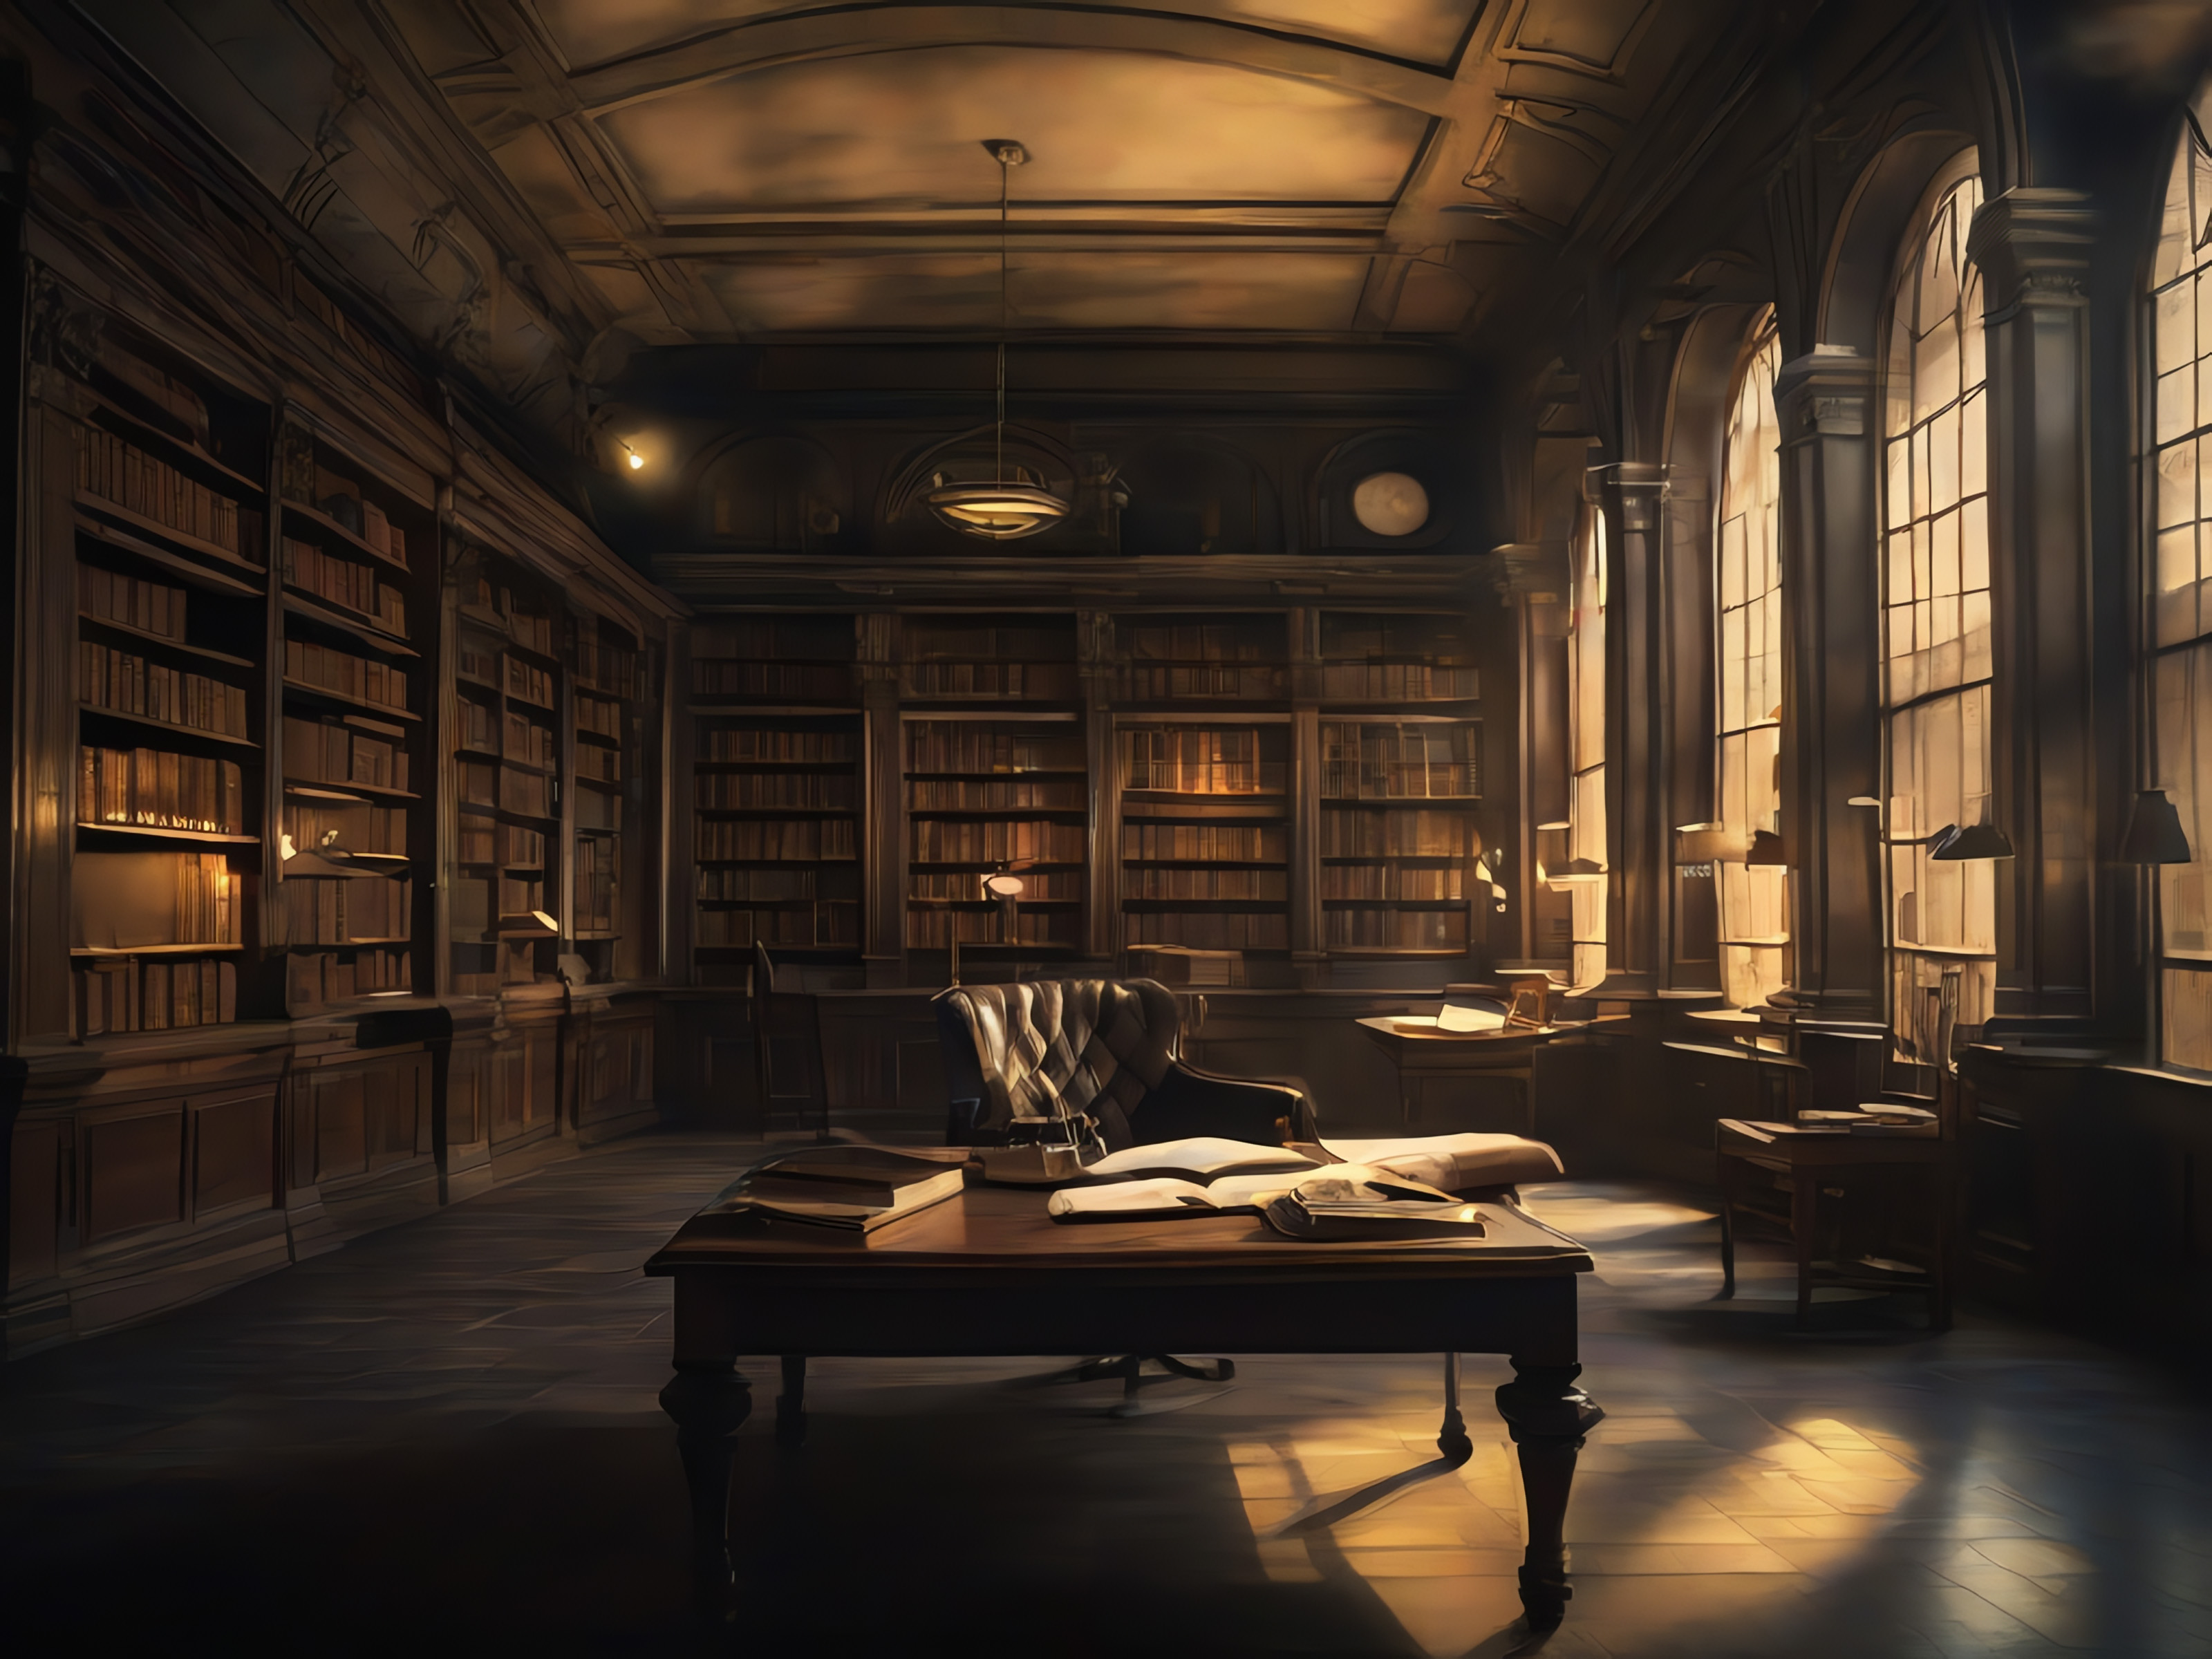 Image of an old research library, filled with books but devoid of people